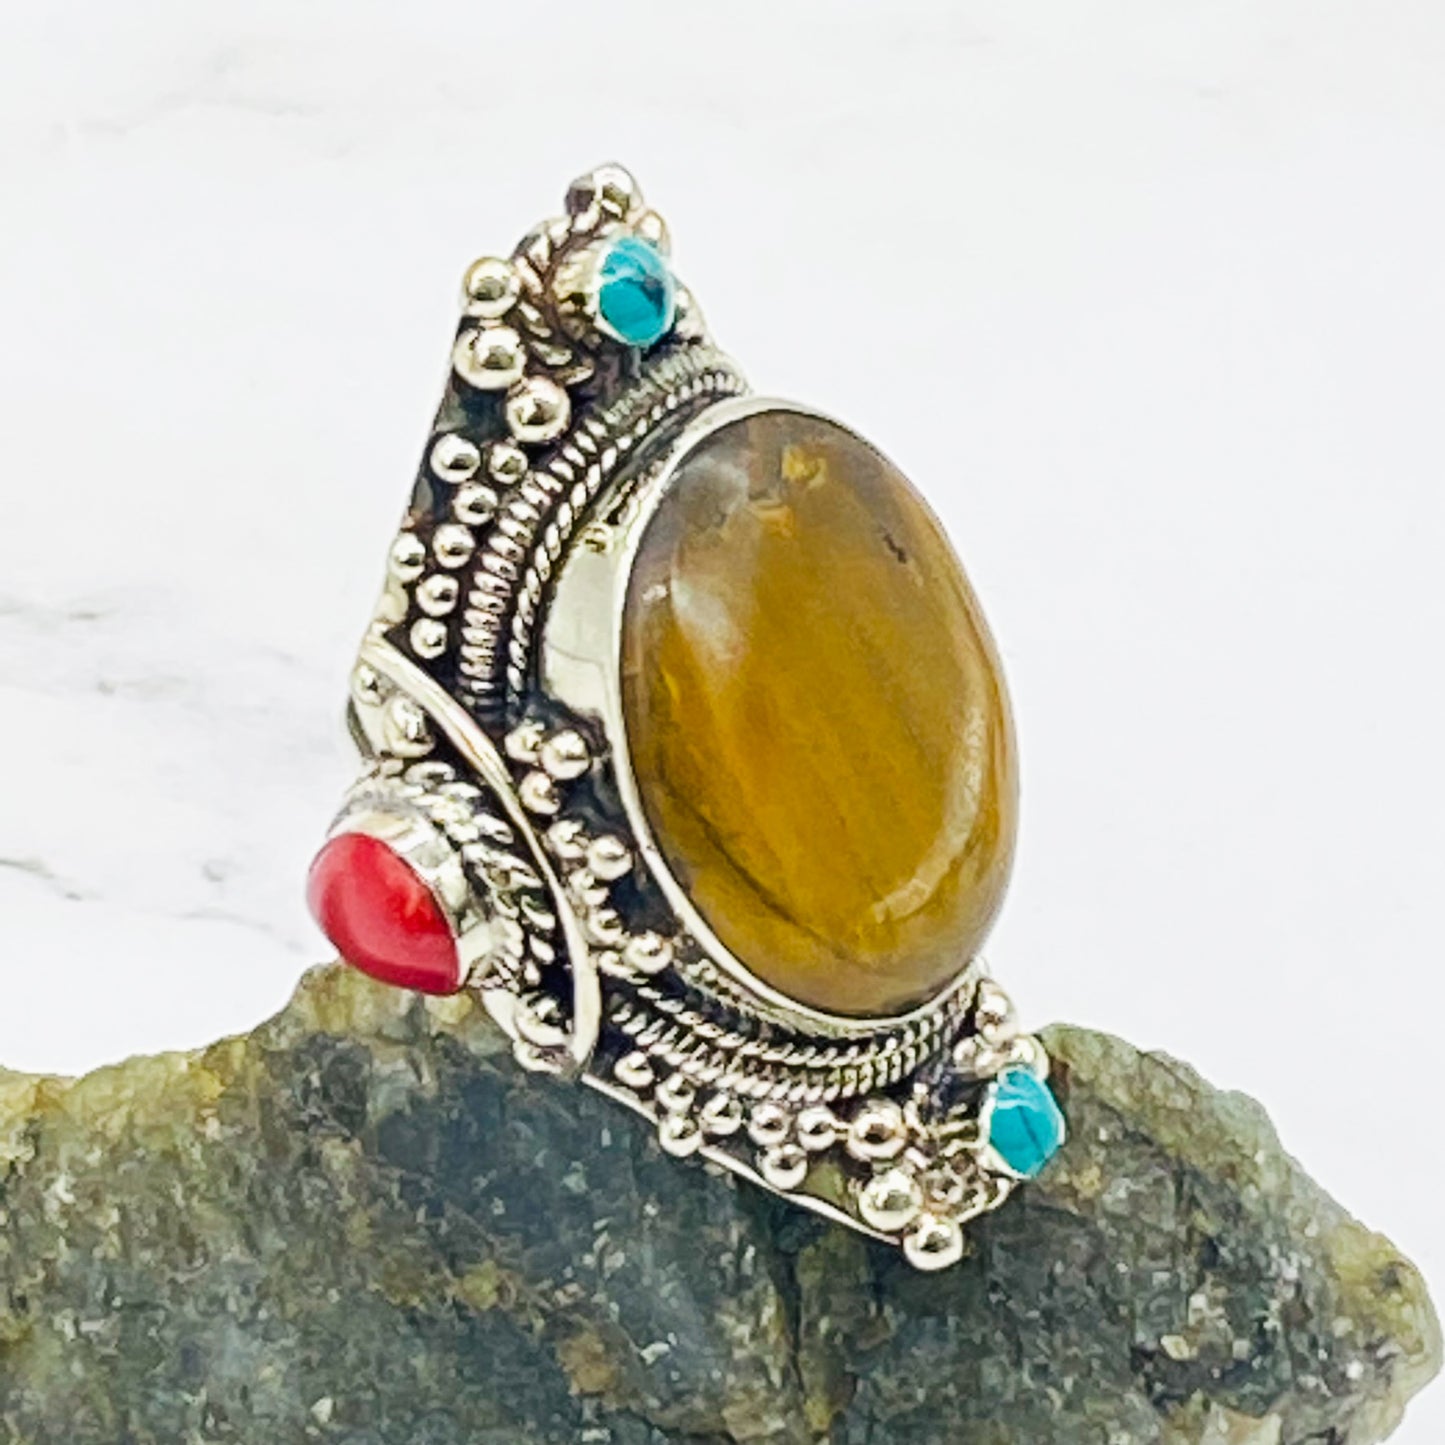 Stone silver rings, natural stone rings, handmade silver stone rings, culture fusion, Tibetan jewelry, unisex jewelry, bohemian jewelry